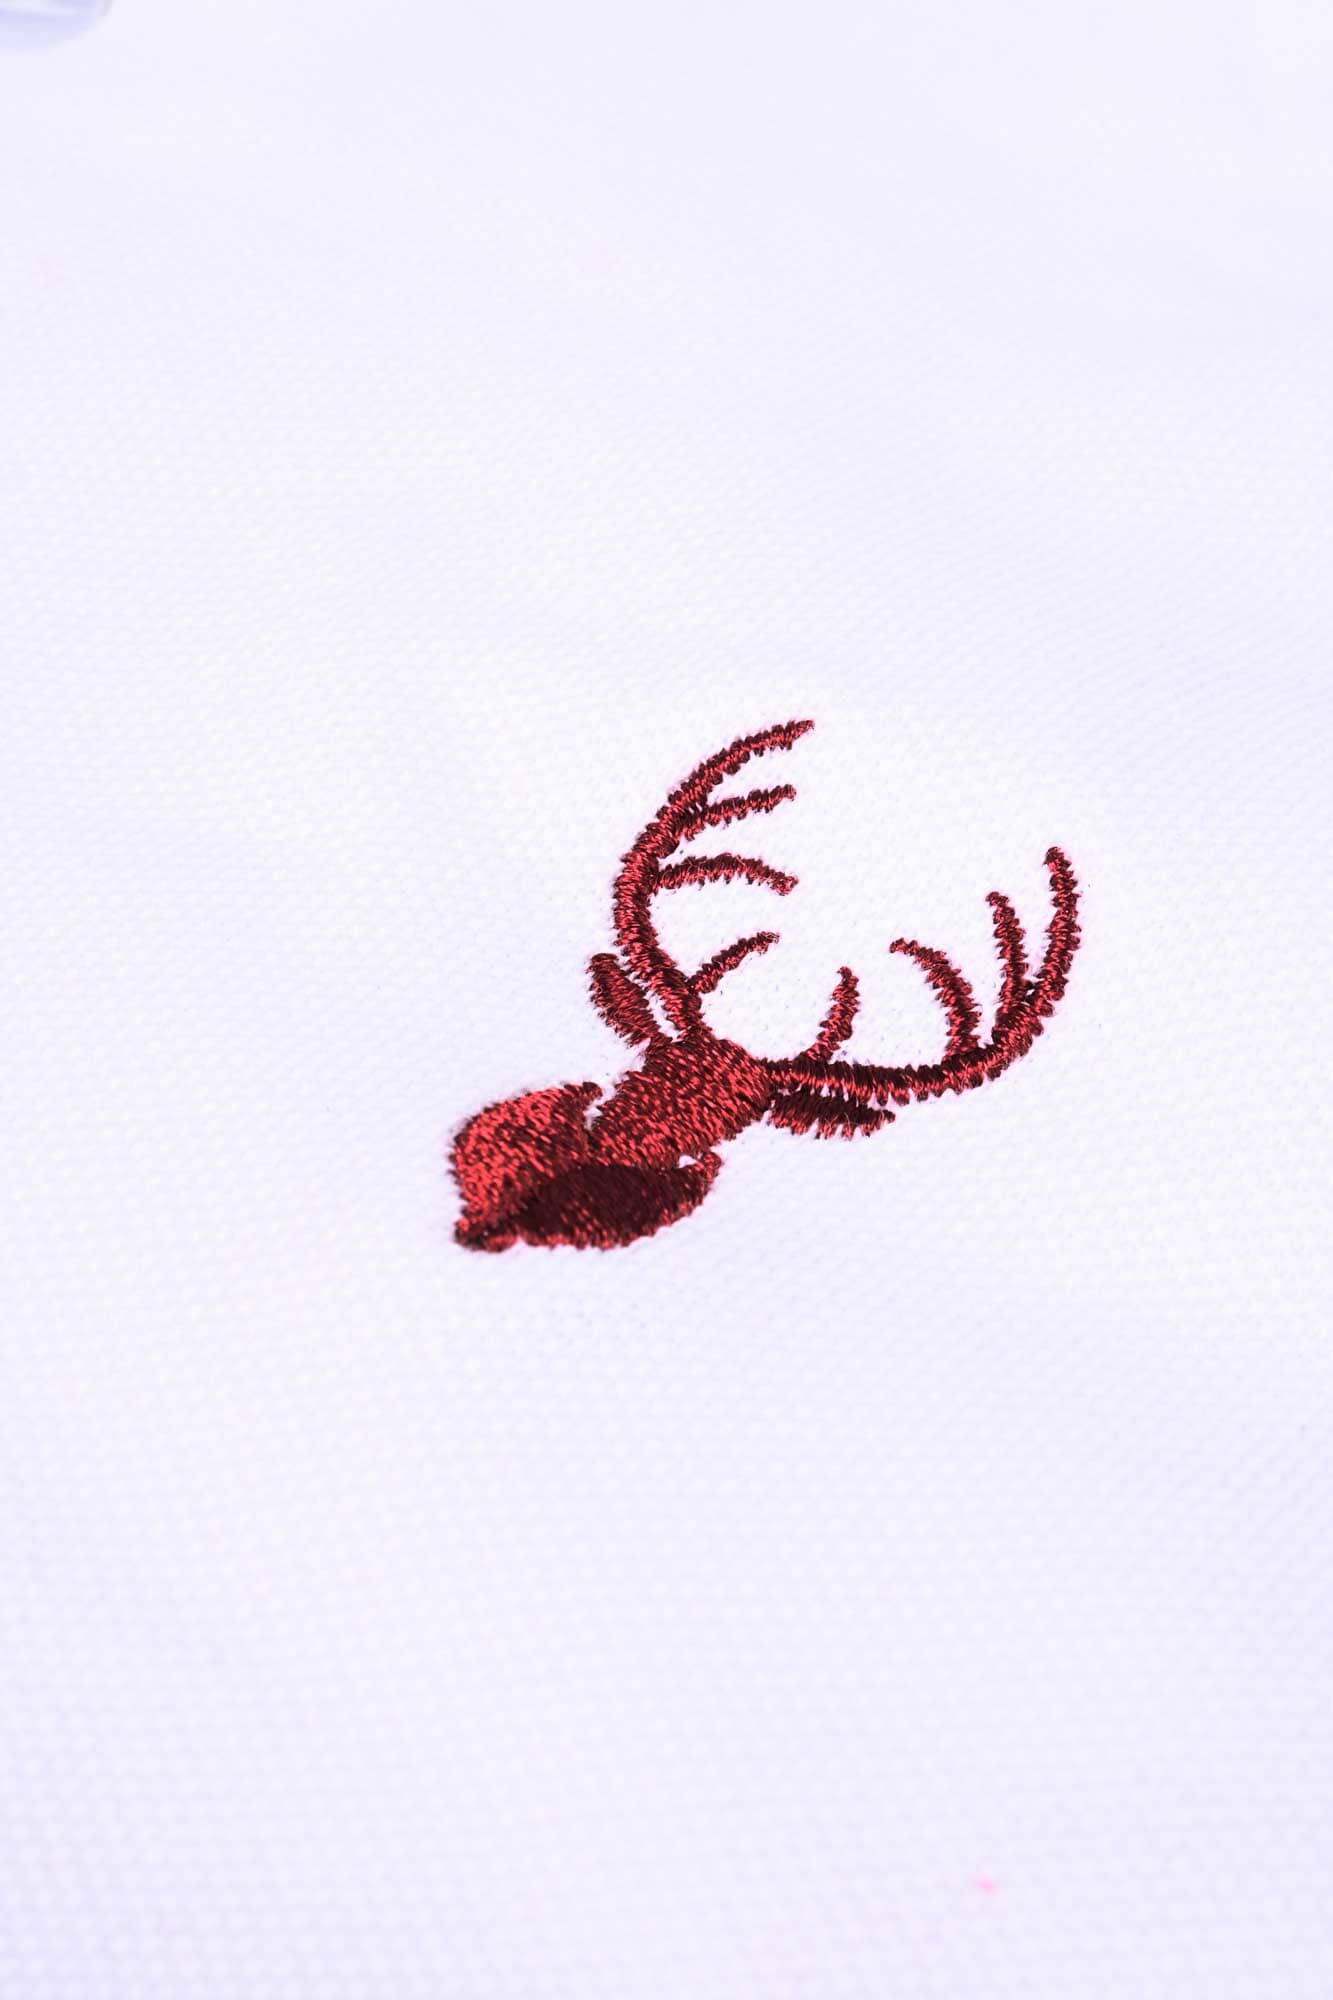 Polo Republica Men's Noble Deer Embroidered Short Sleeve Polo Shirt Men's Polo Shirt Polo Republica 